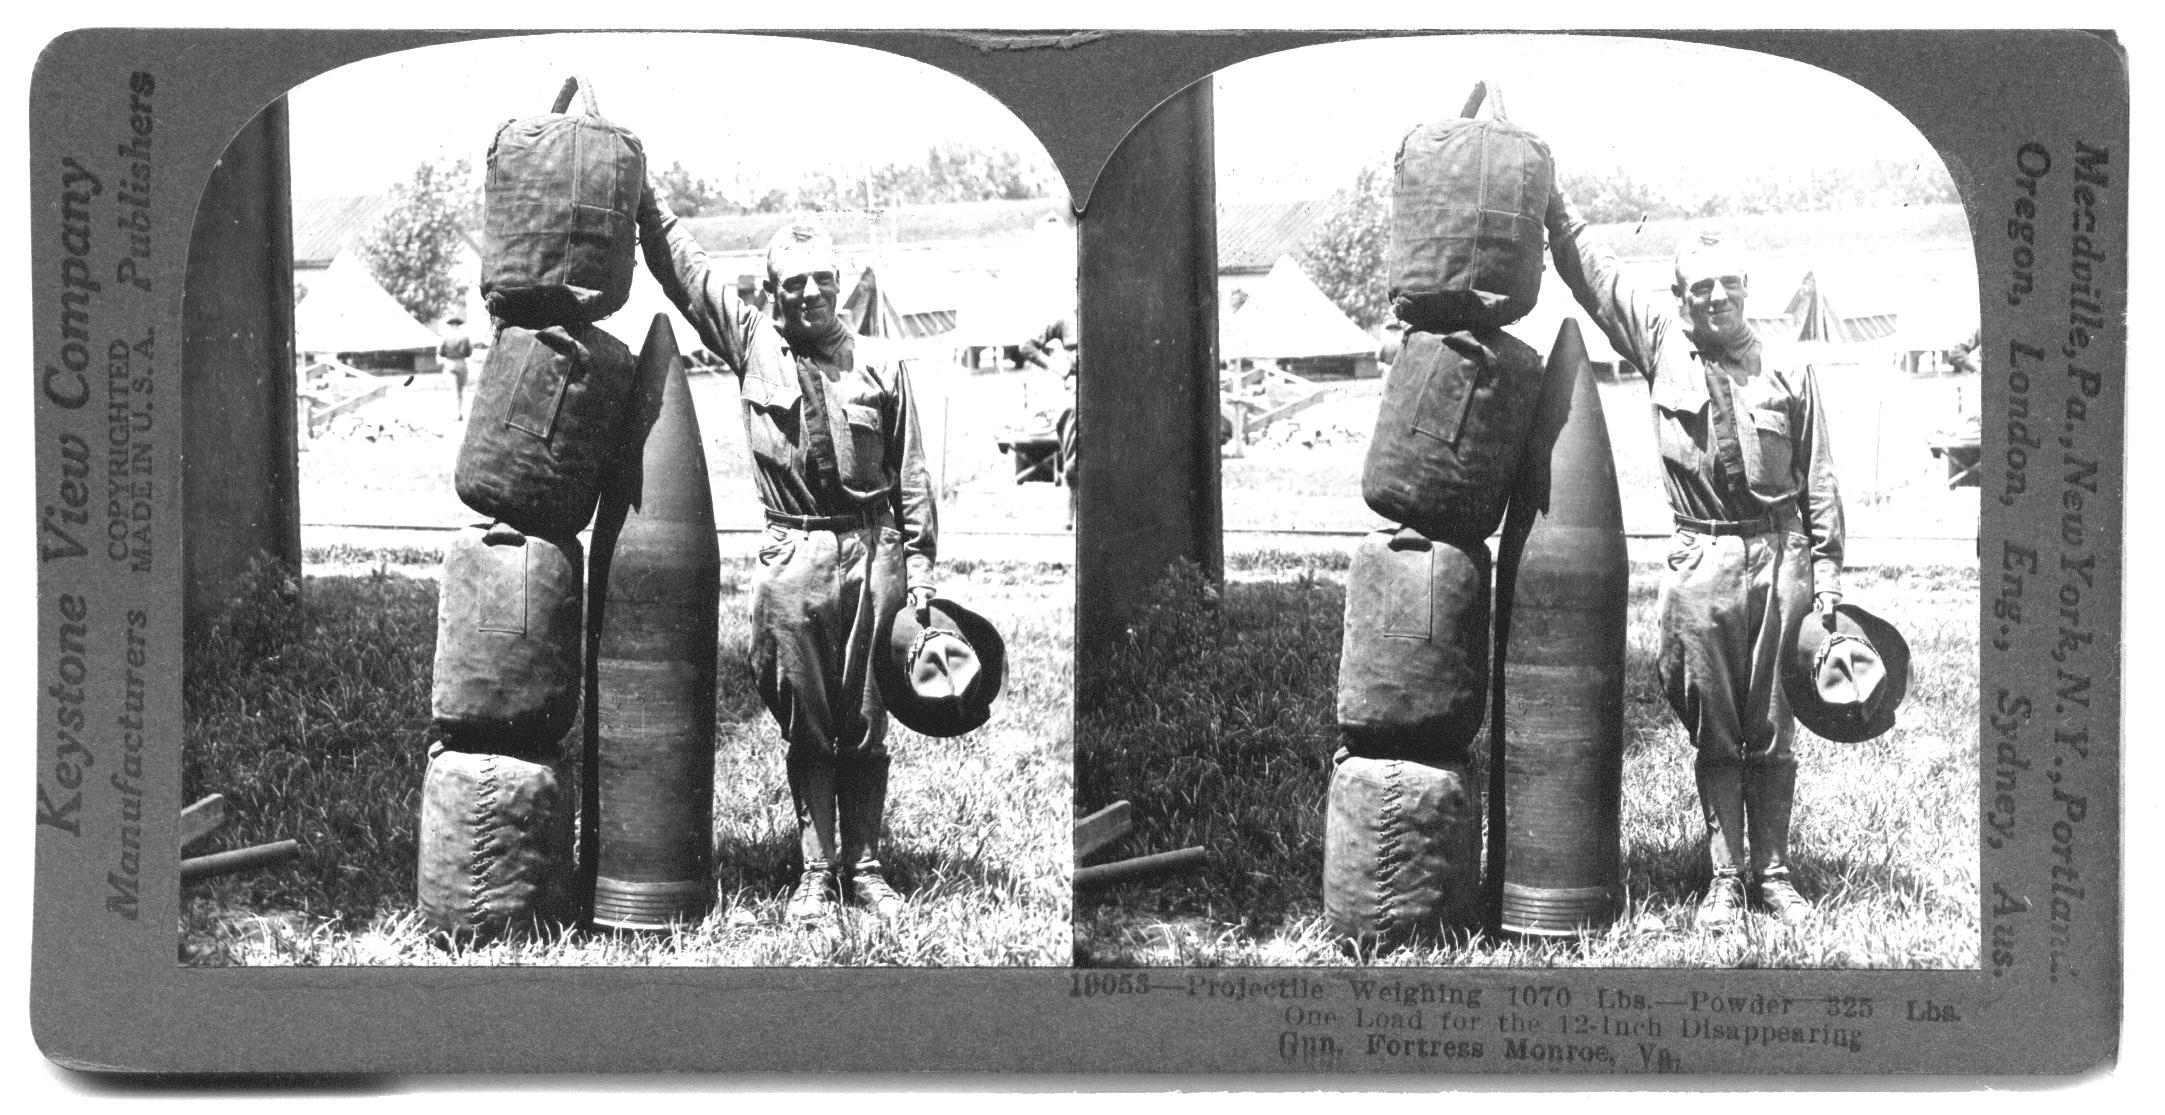 Projectile Weighing 1070 Lbs. - Powder 325 Lbs. One Load for the 12-inch Disappearing Gun. Fortress Monroe, Va.